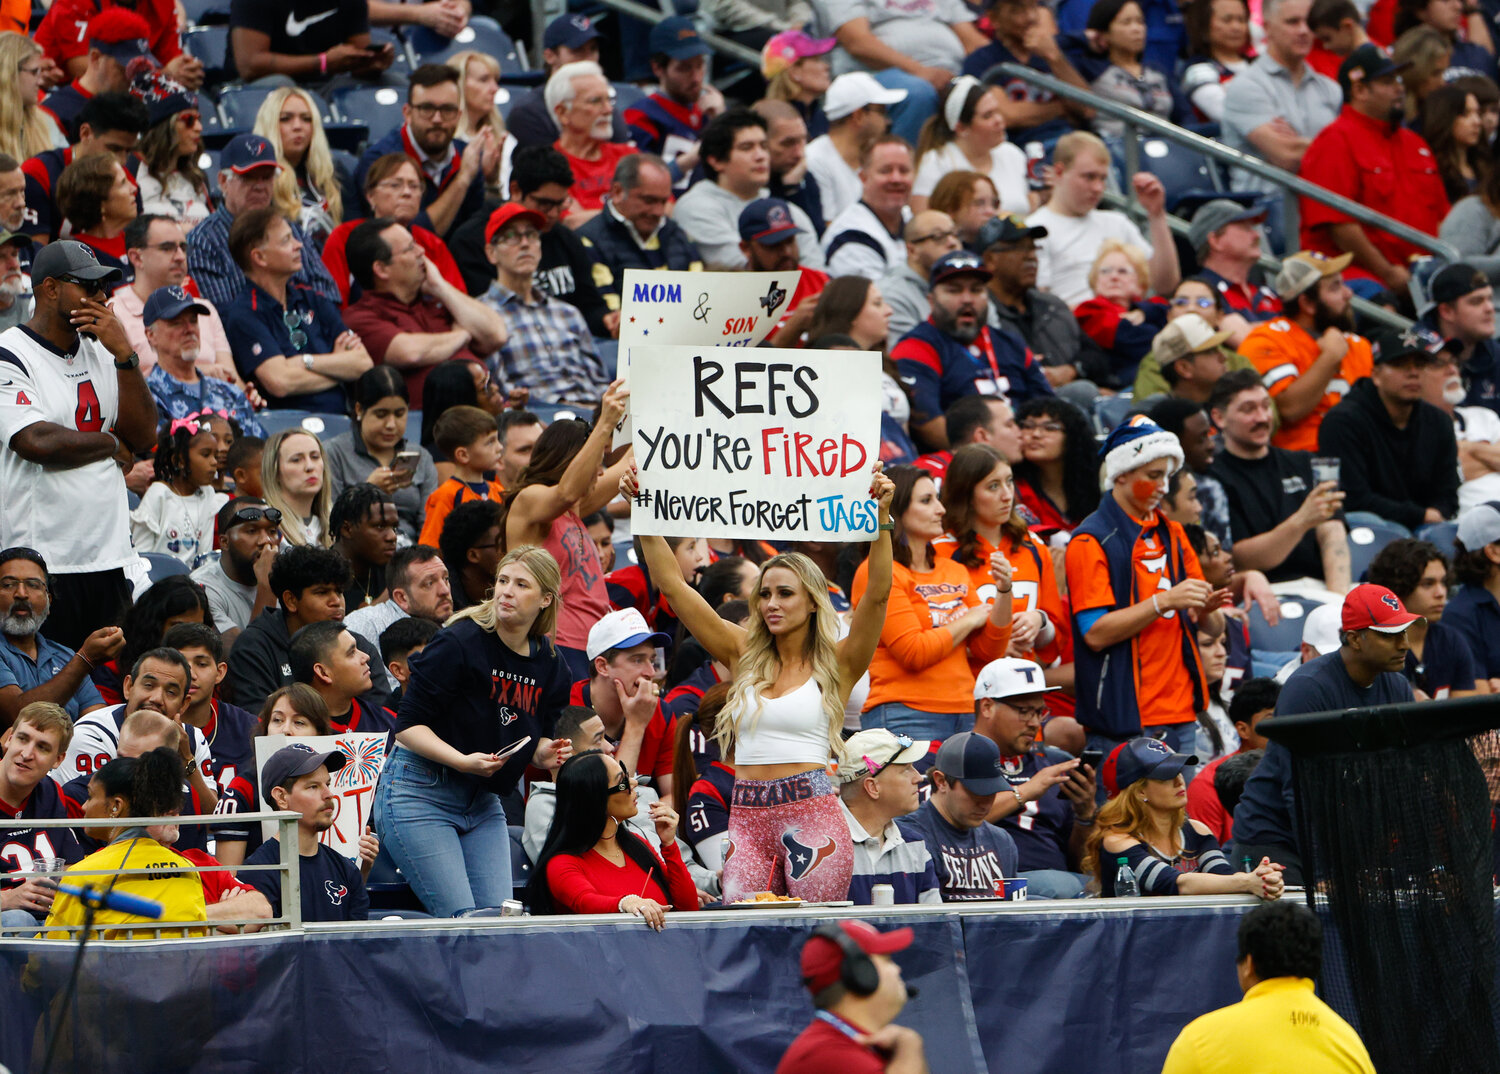 A Houston fan holds up a sign stating “Refs: You’re Fired” during an NFL game between the Texans and the Broncos on December 3, 2023 in Houston. The Texans won, 22-17.